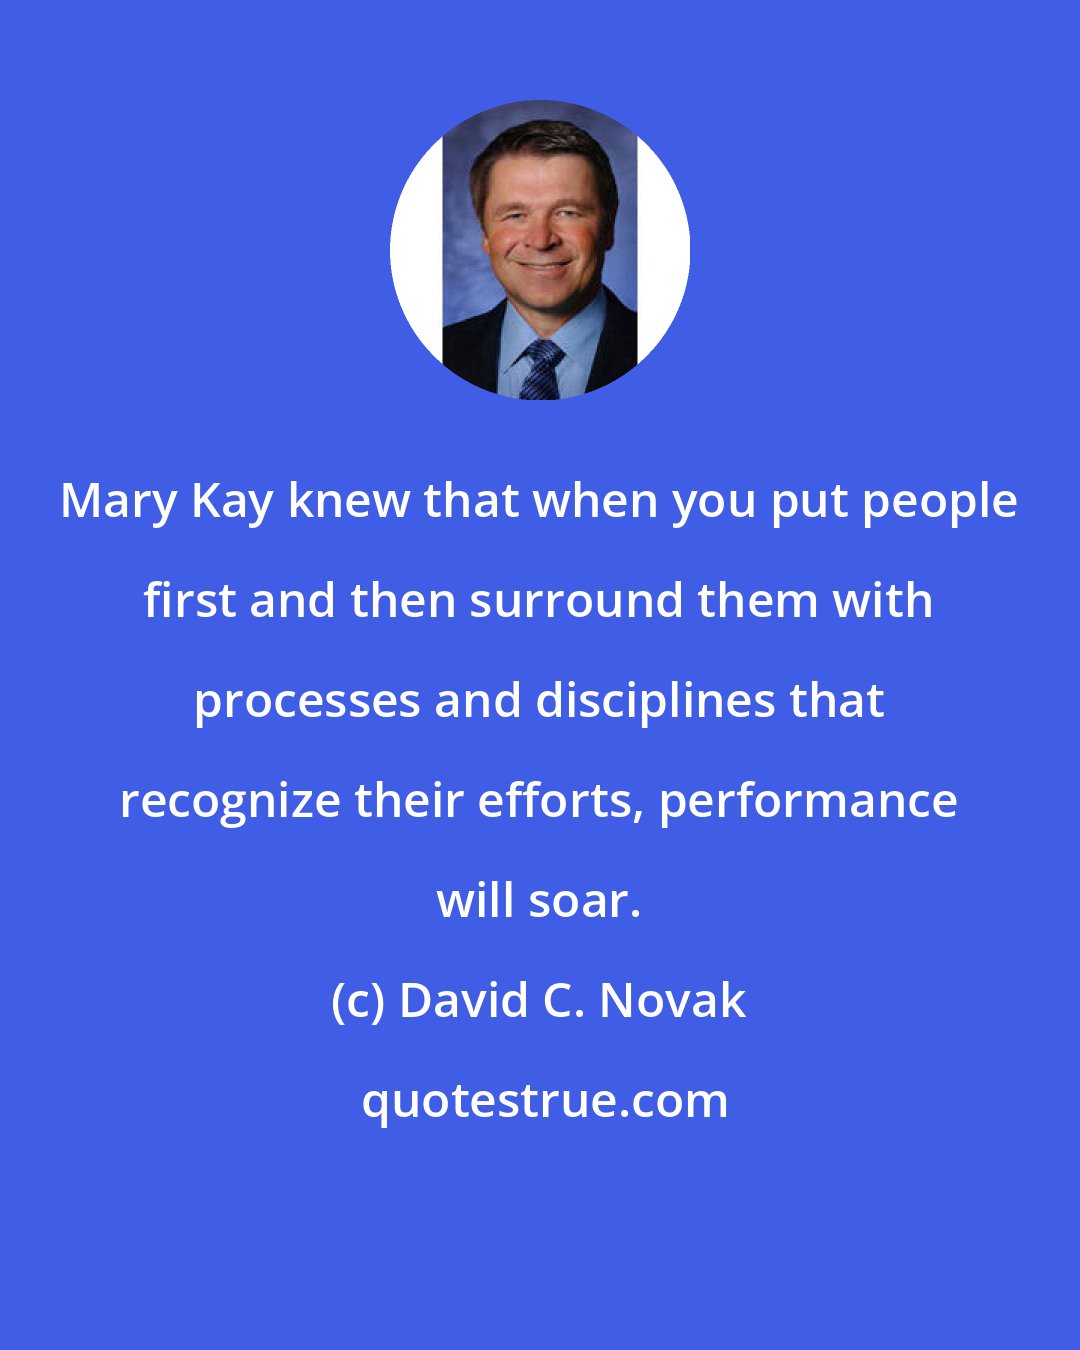 David C. Novak: Mary Kay knew that when you put people first and then surround them with processes and disciplines that recognize their efforts, performance will soar.